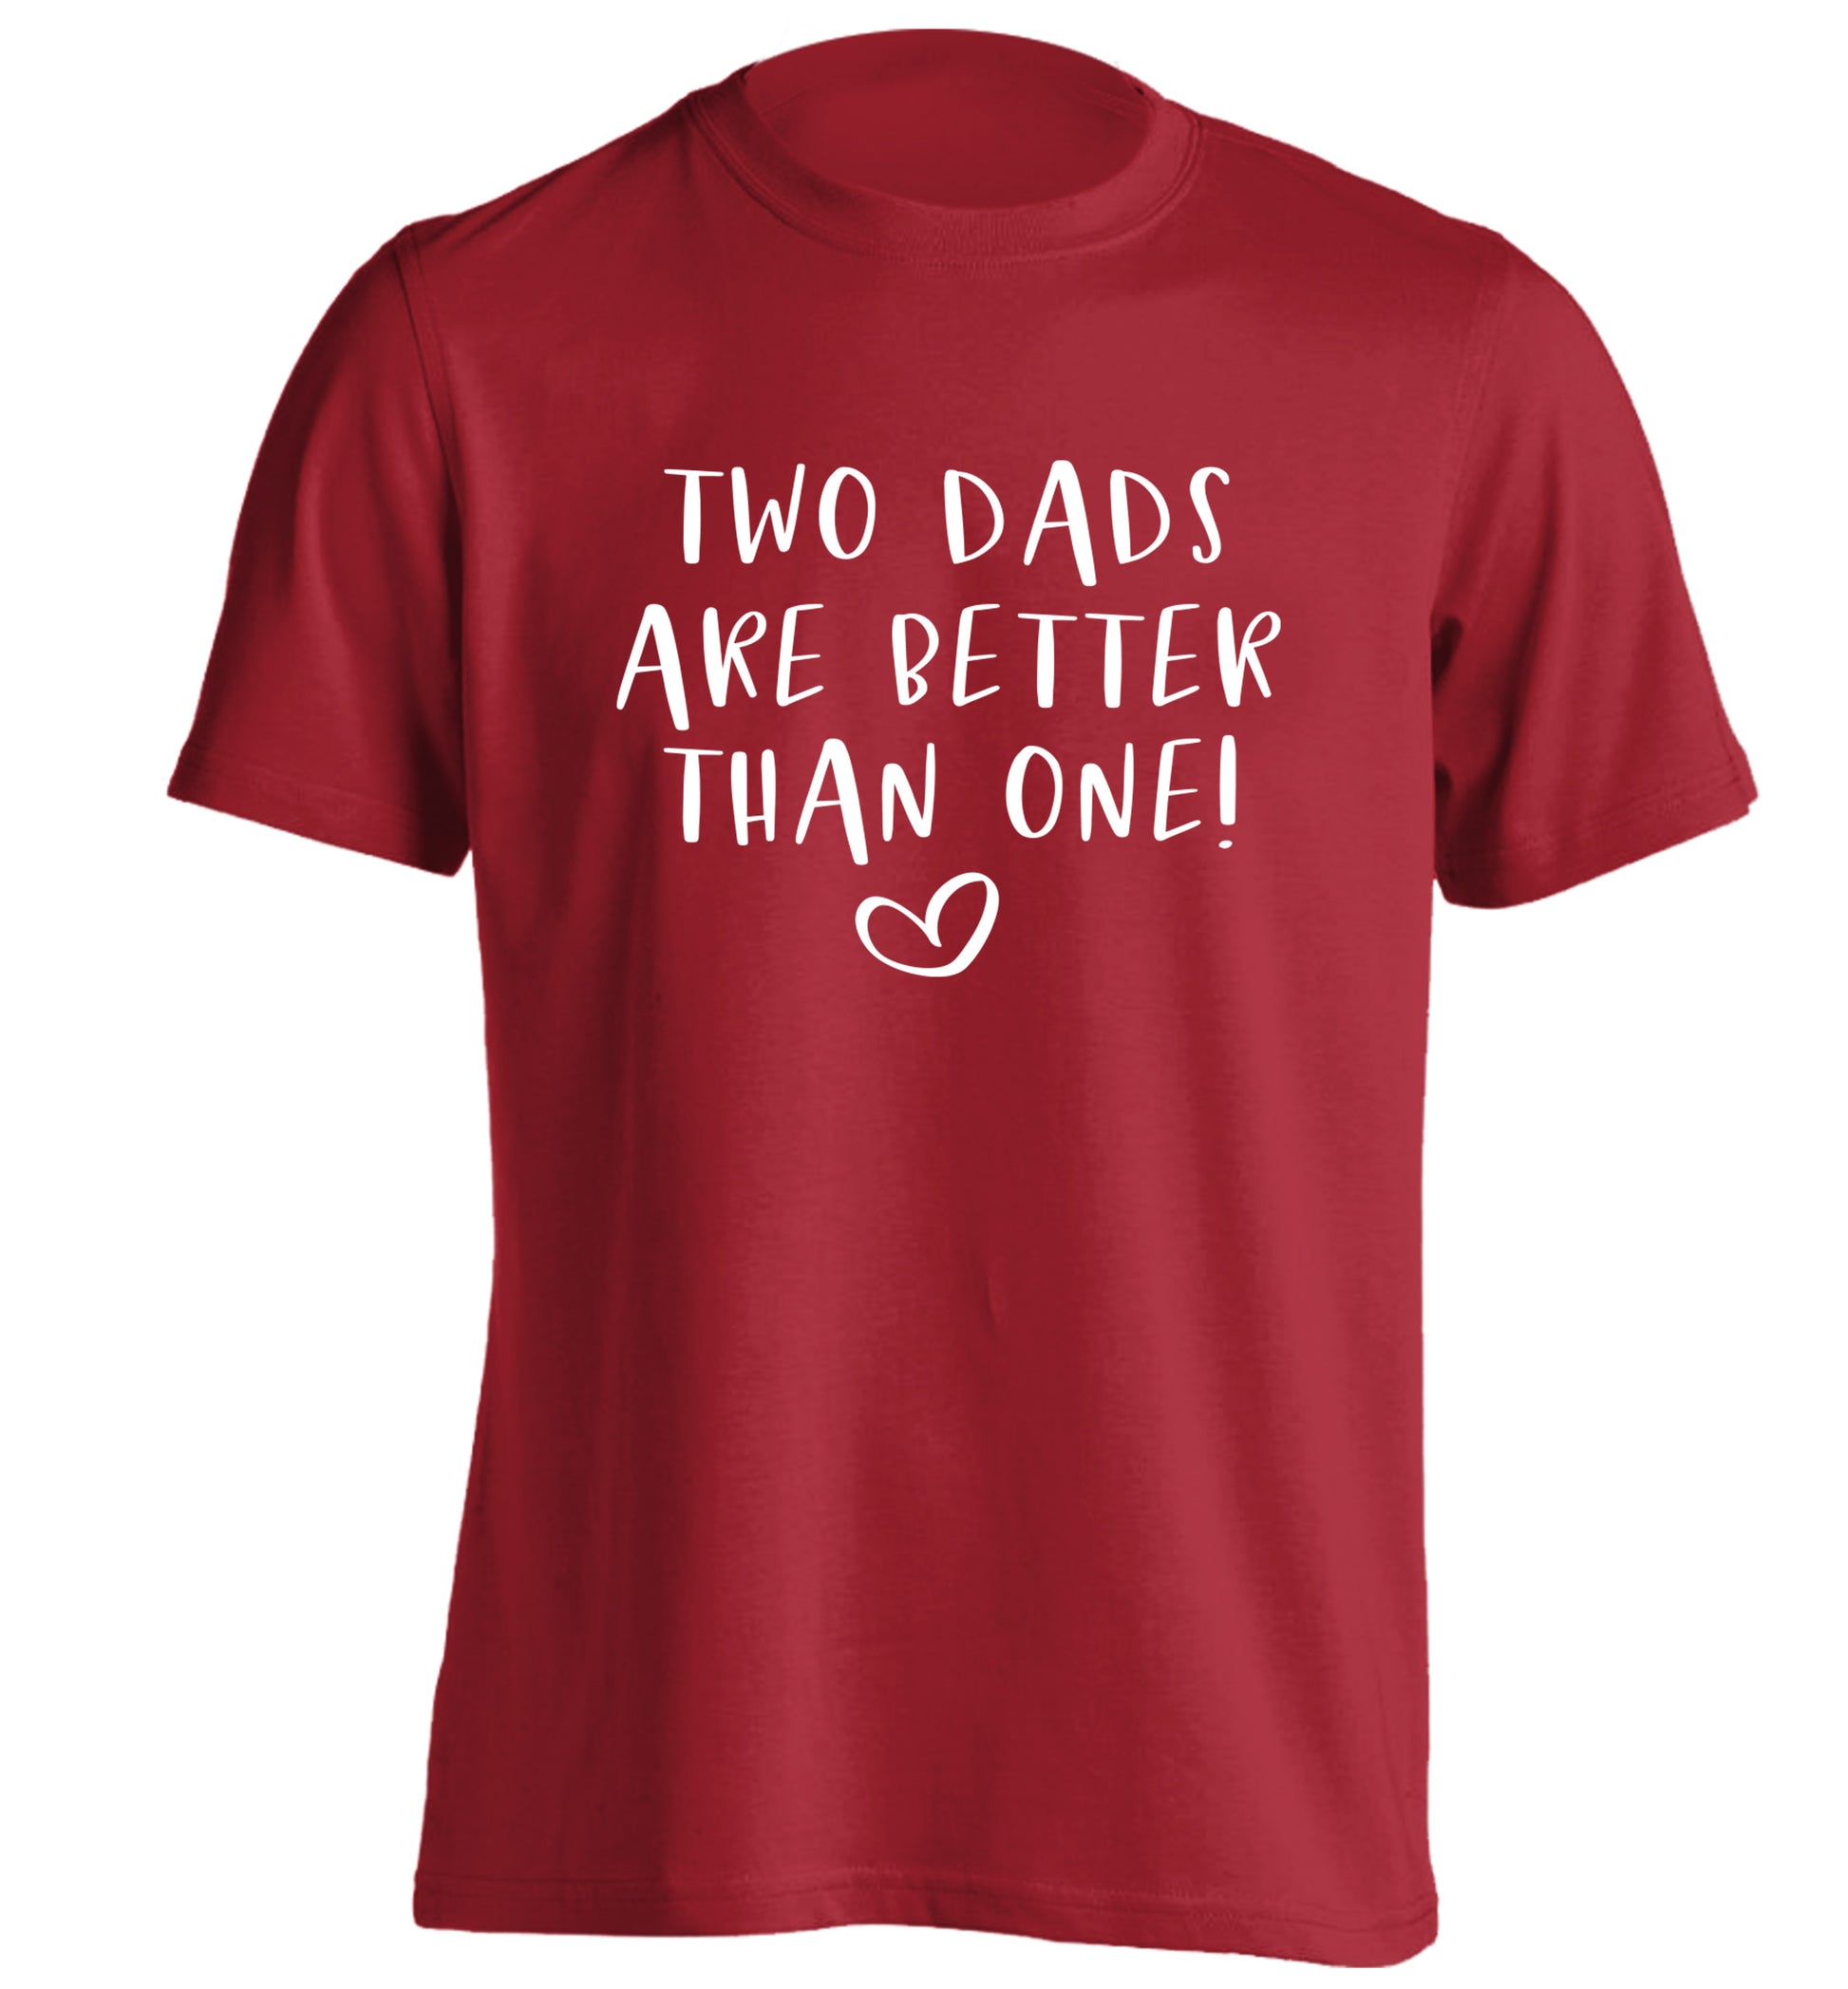 Two dads are better than one adults unisex red Tshirt 2XL